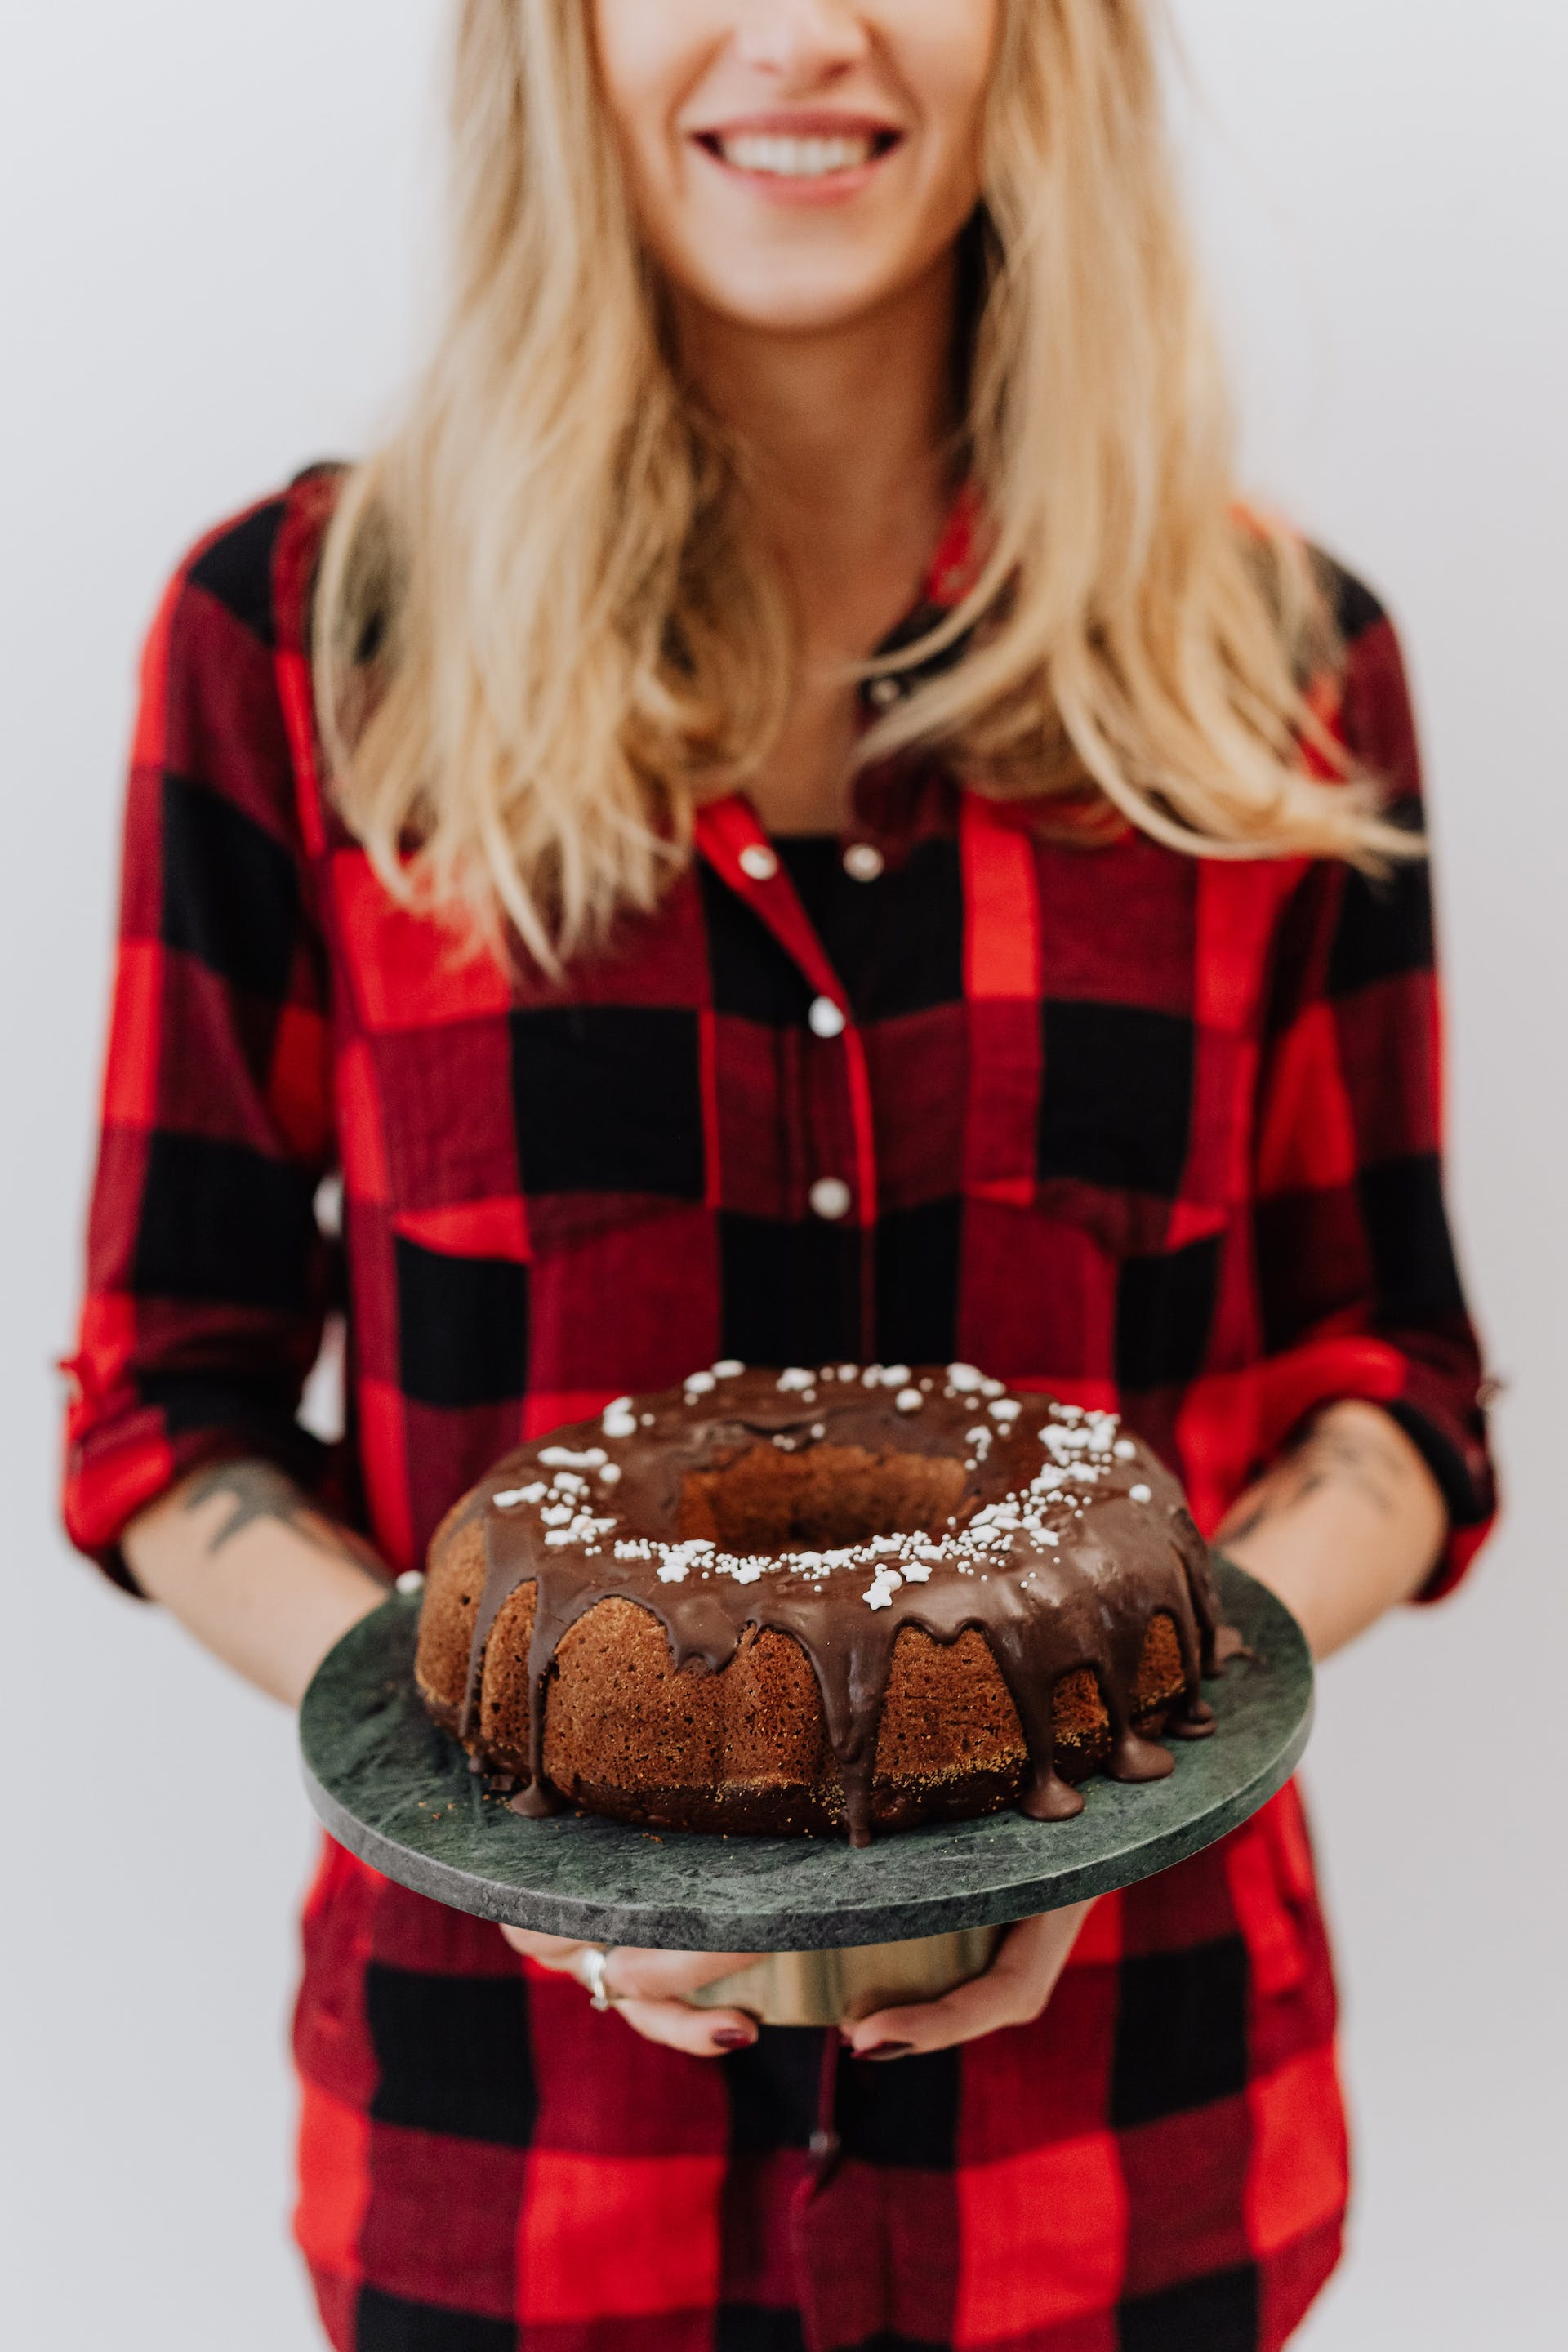 A woman holding a chocolate cake | Source: Pexels